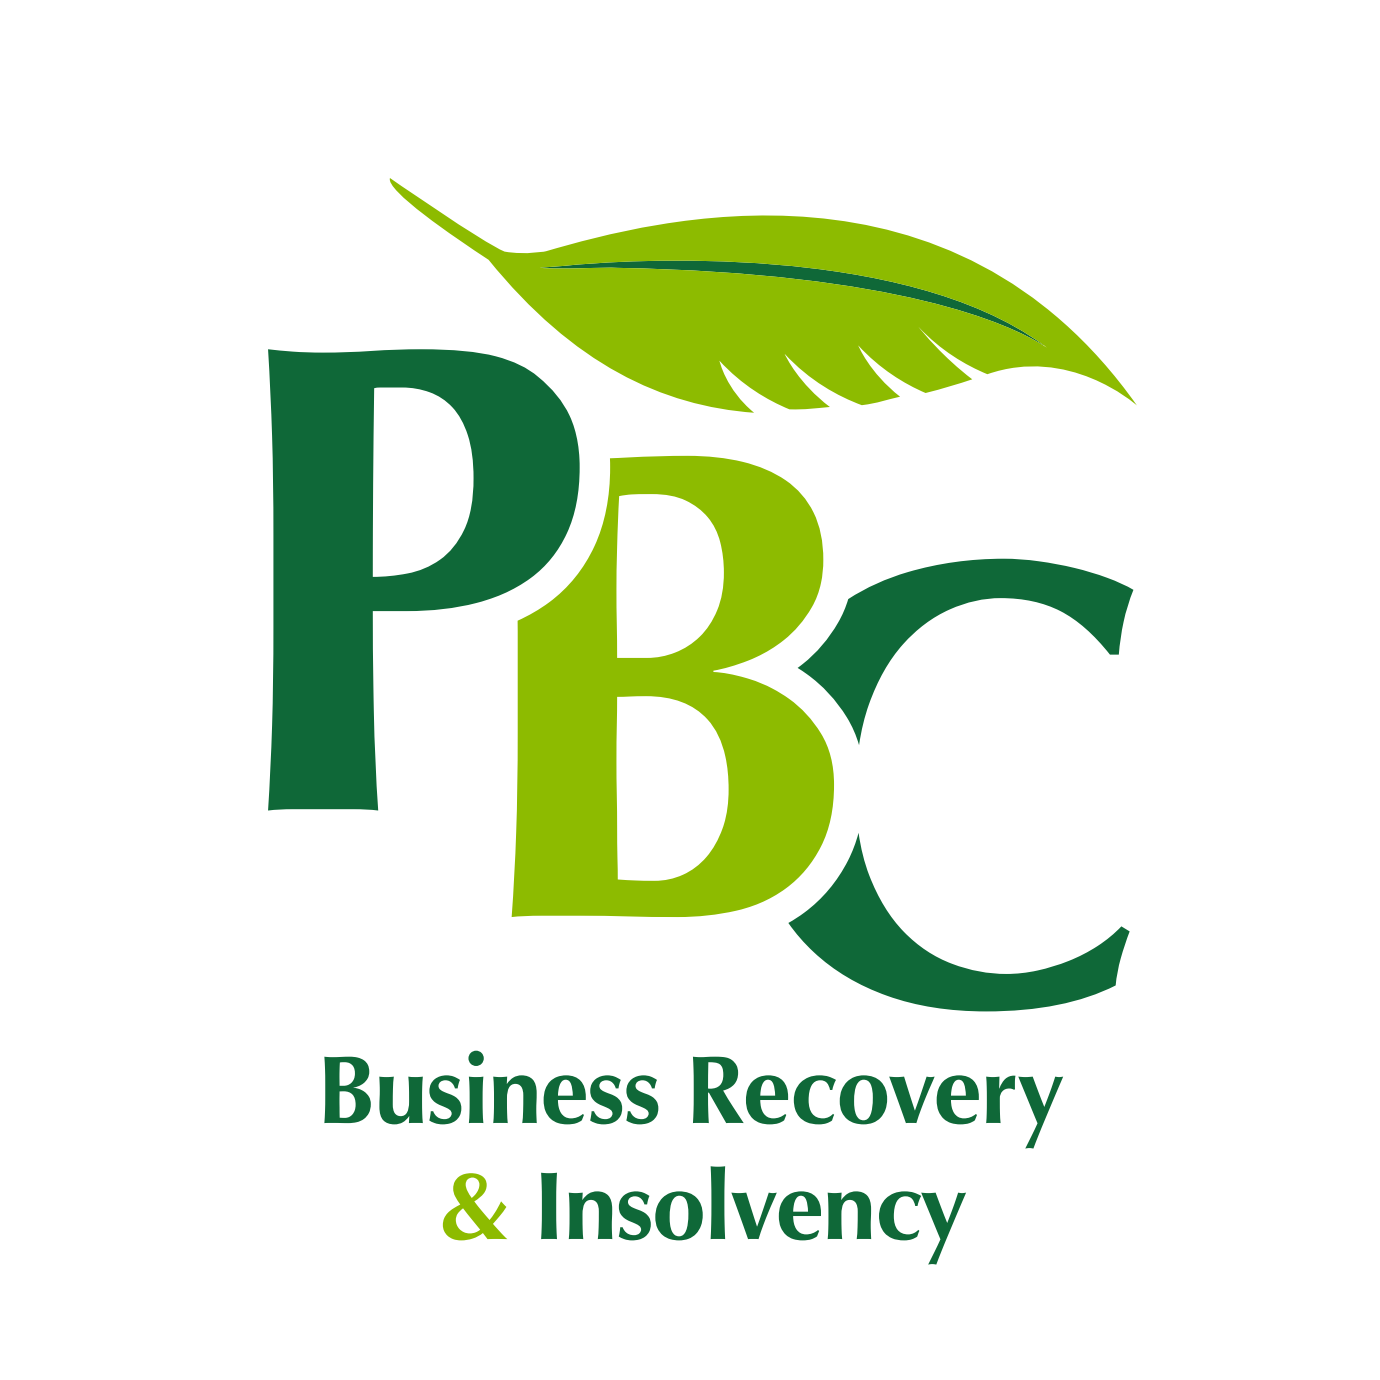 PBC Business Recovery & Insolvency